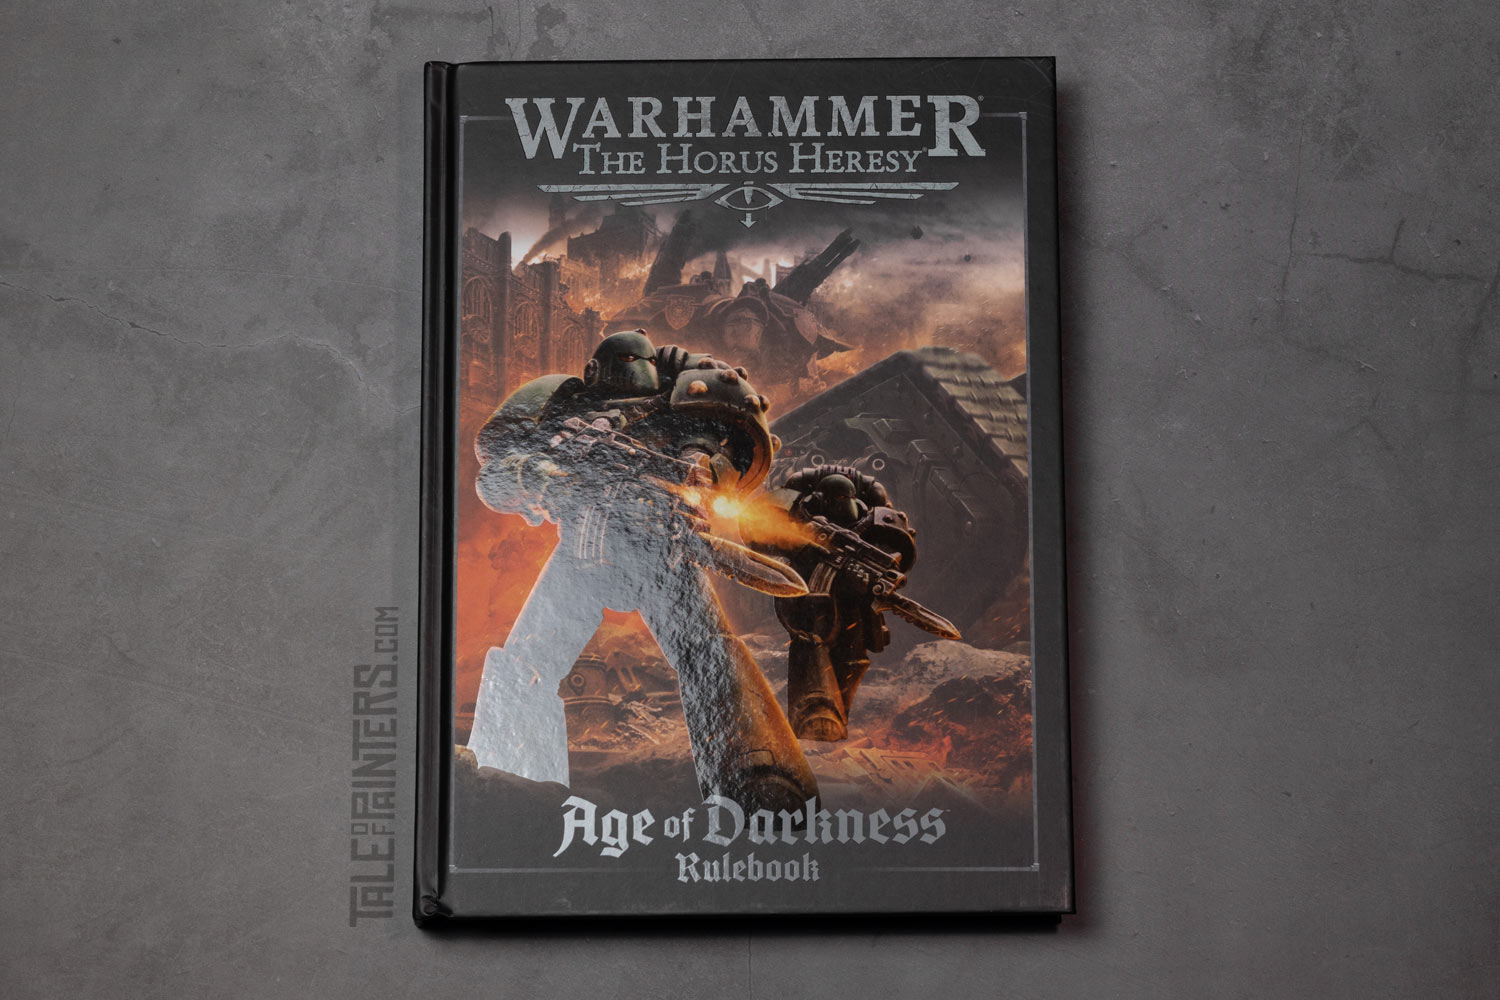 The Horus Heresy Age of Darkness Rulebook cover